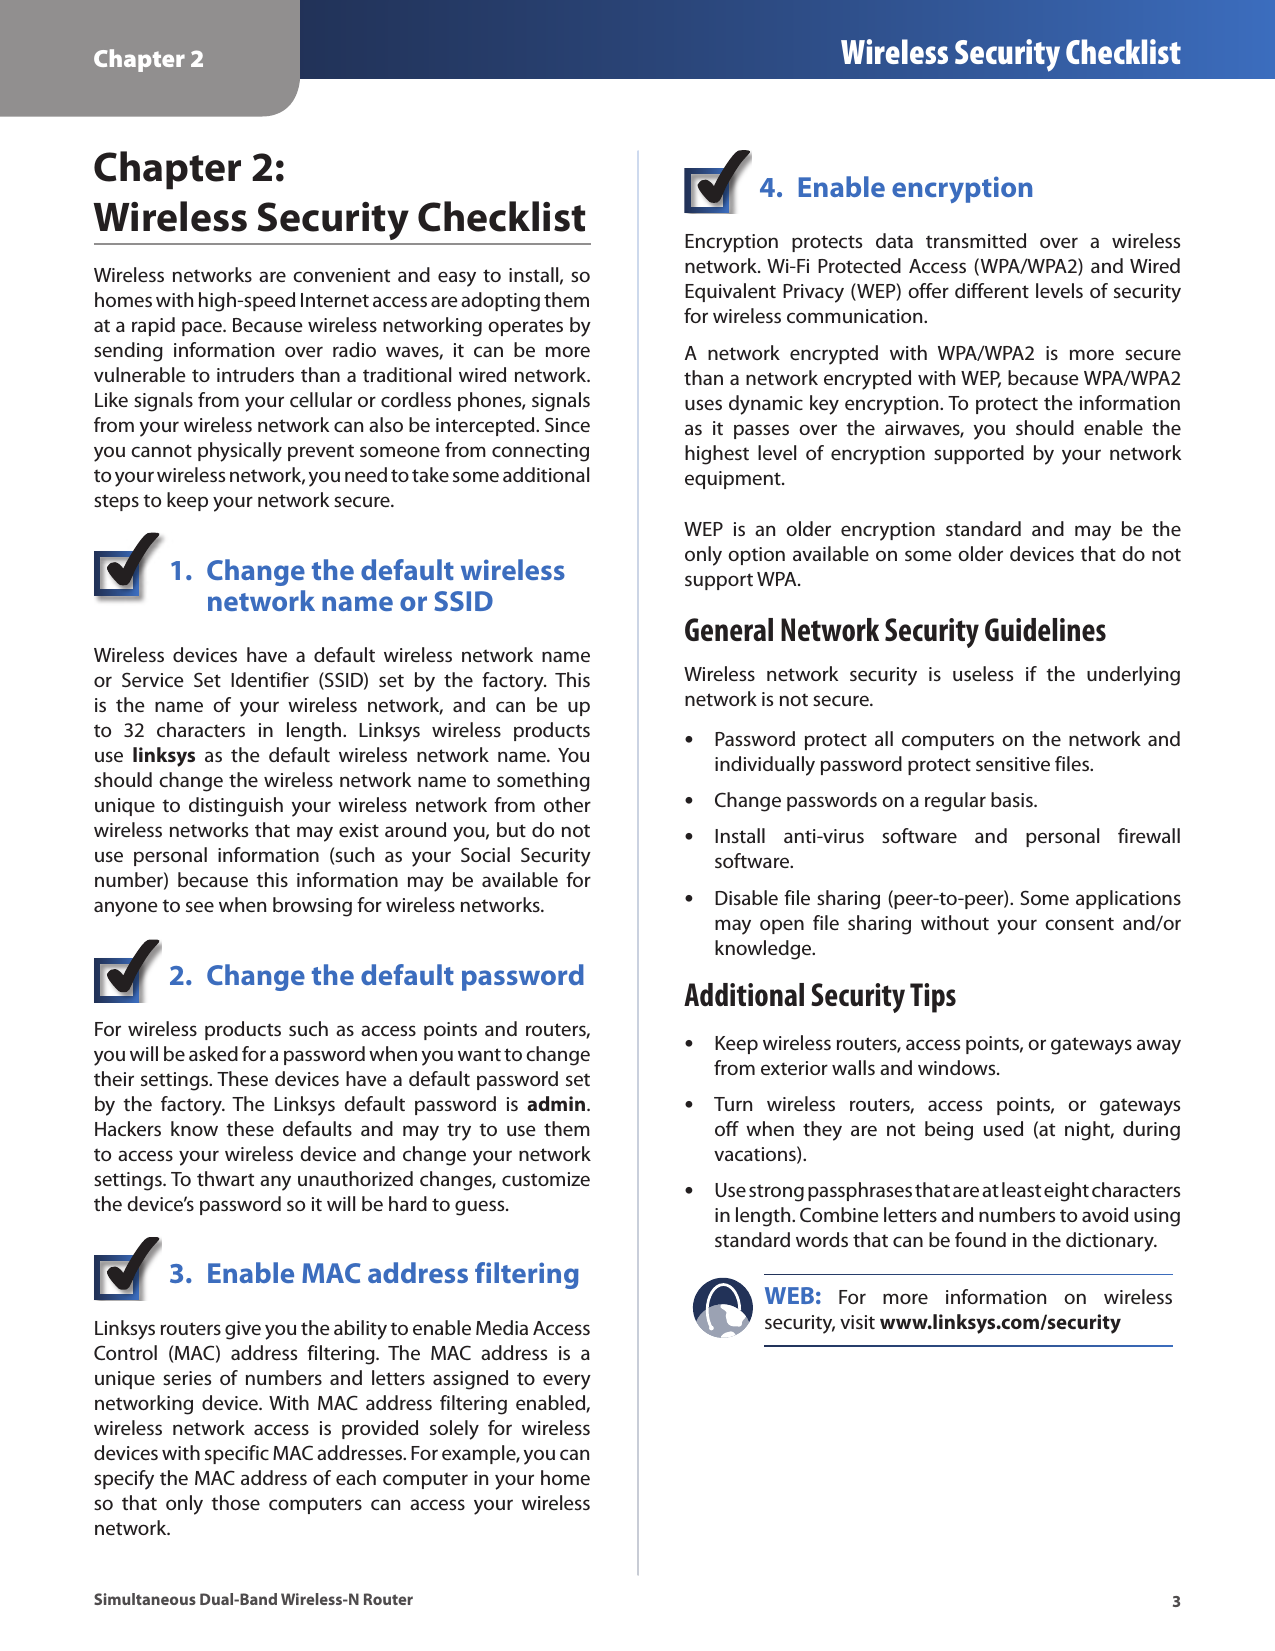 Chapter 2 Wireless Security Checklist3Simultaneous Dual-Band Wireless-N RouterChapter 2:  Wireless Security ChecklistWireless  networks are convenient  and  easy to install, so homes with high-speed Internet access are adopting them at a rapid pace. Because wireless networking operates by sending  information  over  radio  waves,  it  can  be  more vulnerable to intruders than a traditional wired network. Like signals from your cellular or cordless phones, signals from your wireless network can also be intercepted. Since you cannot physically prevent someone from connecting to your wireless network, you need to take some additional steps to keep your network secure. 1.  Change the default wireless    network name or SSIDWireless  devices  have  a  default  wireless  network  name or  Service  Set  Identifier  (SSID)  set  by  the  factory.  This is  the  name  of  your  wireless  network,  and  can  be  up to  32  characters  in  length.  Linksys  wireless  products use  linksys  as  the  default  wireless  network  name.  You should change the wireless network name to something unique  to distinguish  your wireless  network from  other wireless networks that may exist around you, but do not use  personal  information  (such  as  your  Social  Security number)  because  this  information  may  be  available  for anyone to see when browsing for wireless networks. 2.  Change the default passwordFor wireless products such as access points and routers, you will be asked for a password when you want to change their settings. These devices have a default password set by  the  factory.  The  Linksys  default  password  is  admin. Hackers  know  these  defaults  and  may  try  to  use  them to access your wireless device and change your network settings. To thwart any unauthorized changes, customize the device’s password so it will be hard to guess.3.  Enable MAC address filteringLinksys routers give you the ability to enable Media Access Control  (MAC)  address  filtering.  The  MAC  address  is  a unique  series  of  numbers  and  letters  assigned  to  every networking  device. With  MAC  address filtering  enabled, wireless  network  access  is  provided  solely  for  wireless devices with specific MAC addresses. For example, you can specify the MAC address of each computer in your home so  that  only  those  computers  can  access  your  wireless network. 4.  Enable encryptionEncryption  protects  data  transmitted  over  a  wireless network. Wi-Fi Protected  Access (WPA/WPA2) and Wired Equivalent Privacy (WEP) offer different levels of security for wireless communication.A  network  encrypted  with  WPA/WPA2  is  more  secure than a network encrypted with WEP, because WPA/WPA2 uses dynamic key encryption. To protect the information as  it  passes  over  the  airwaves,  you  should  enable  the highest  level  of  encryption  supported  by  your  network equipment. WEP  is  an  older  encryption  standard  and  may  be  the only option available on some older devices that do not support WPA.General Network Security GuidelinesWireless  network  security  is  useless  if  the  underlying network is not secure. Password protect  all computers on  the network  and  •individually password protect sensitive files.Change passwords on a regular basis. •Install  anti-virus  software  and  personal  firewall  •software.Disable file sharing (peer-to-peer). Some applications  •may  open  file  sharing  without  your  consent  and/or knowledge.Additional Security TipsKeep wireless routers, access points, or gateways away  •from exterior walls and windows.Turn  wireless  routers,  access  points,  or  gateways  •off  when  they  are  not  being  used  (at  night,  during vacations).Use strong passphrases that are at least eight characters  •in length. Combine letters and numbers to avoid using standard words that can be found in the dictionary. WEB:  For  more  information  on  wireless security, visit www.linksys.com/security